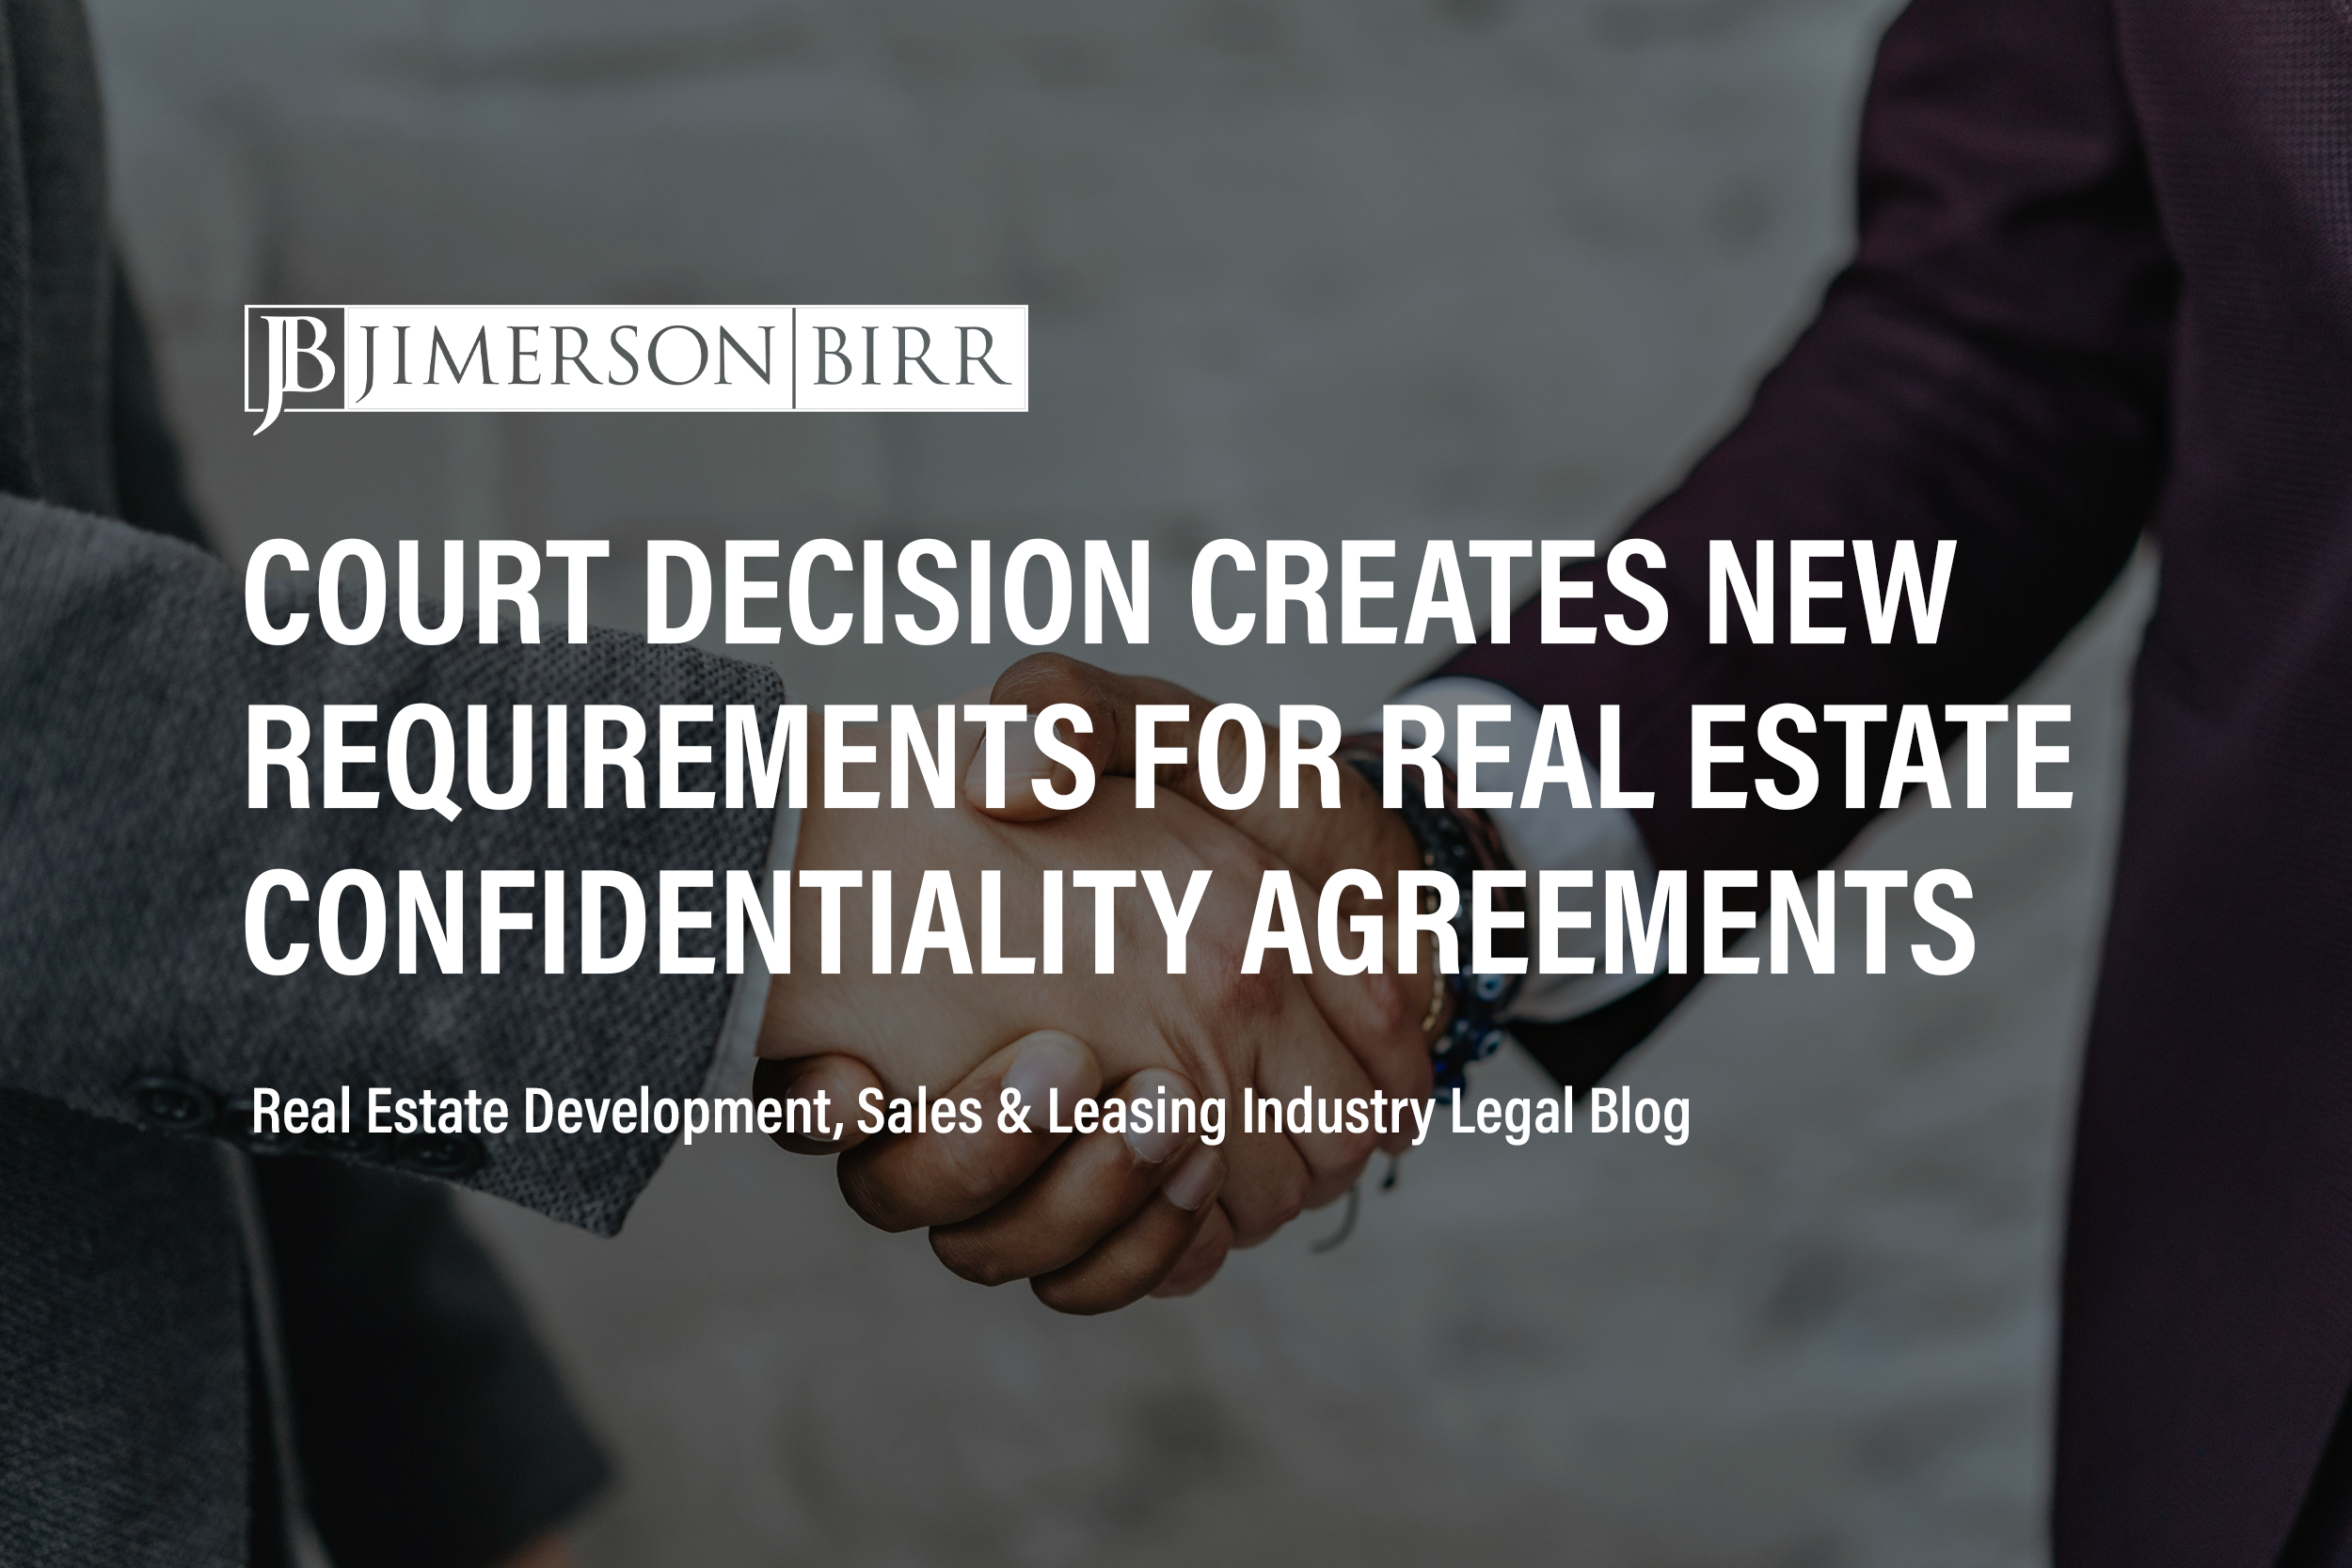 Are Confidentiality Agreements or Other Restrictive Covenants Enforceable in Florida Real Estate Transactions?